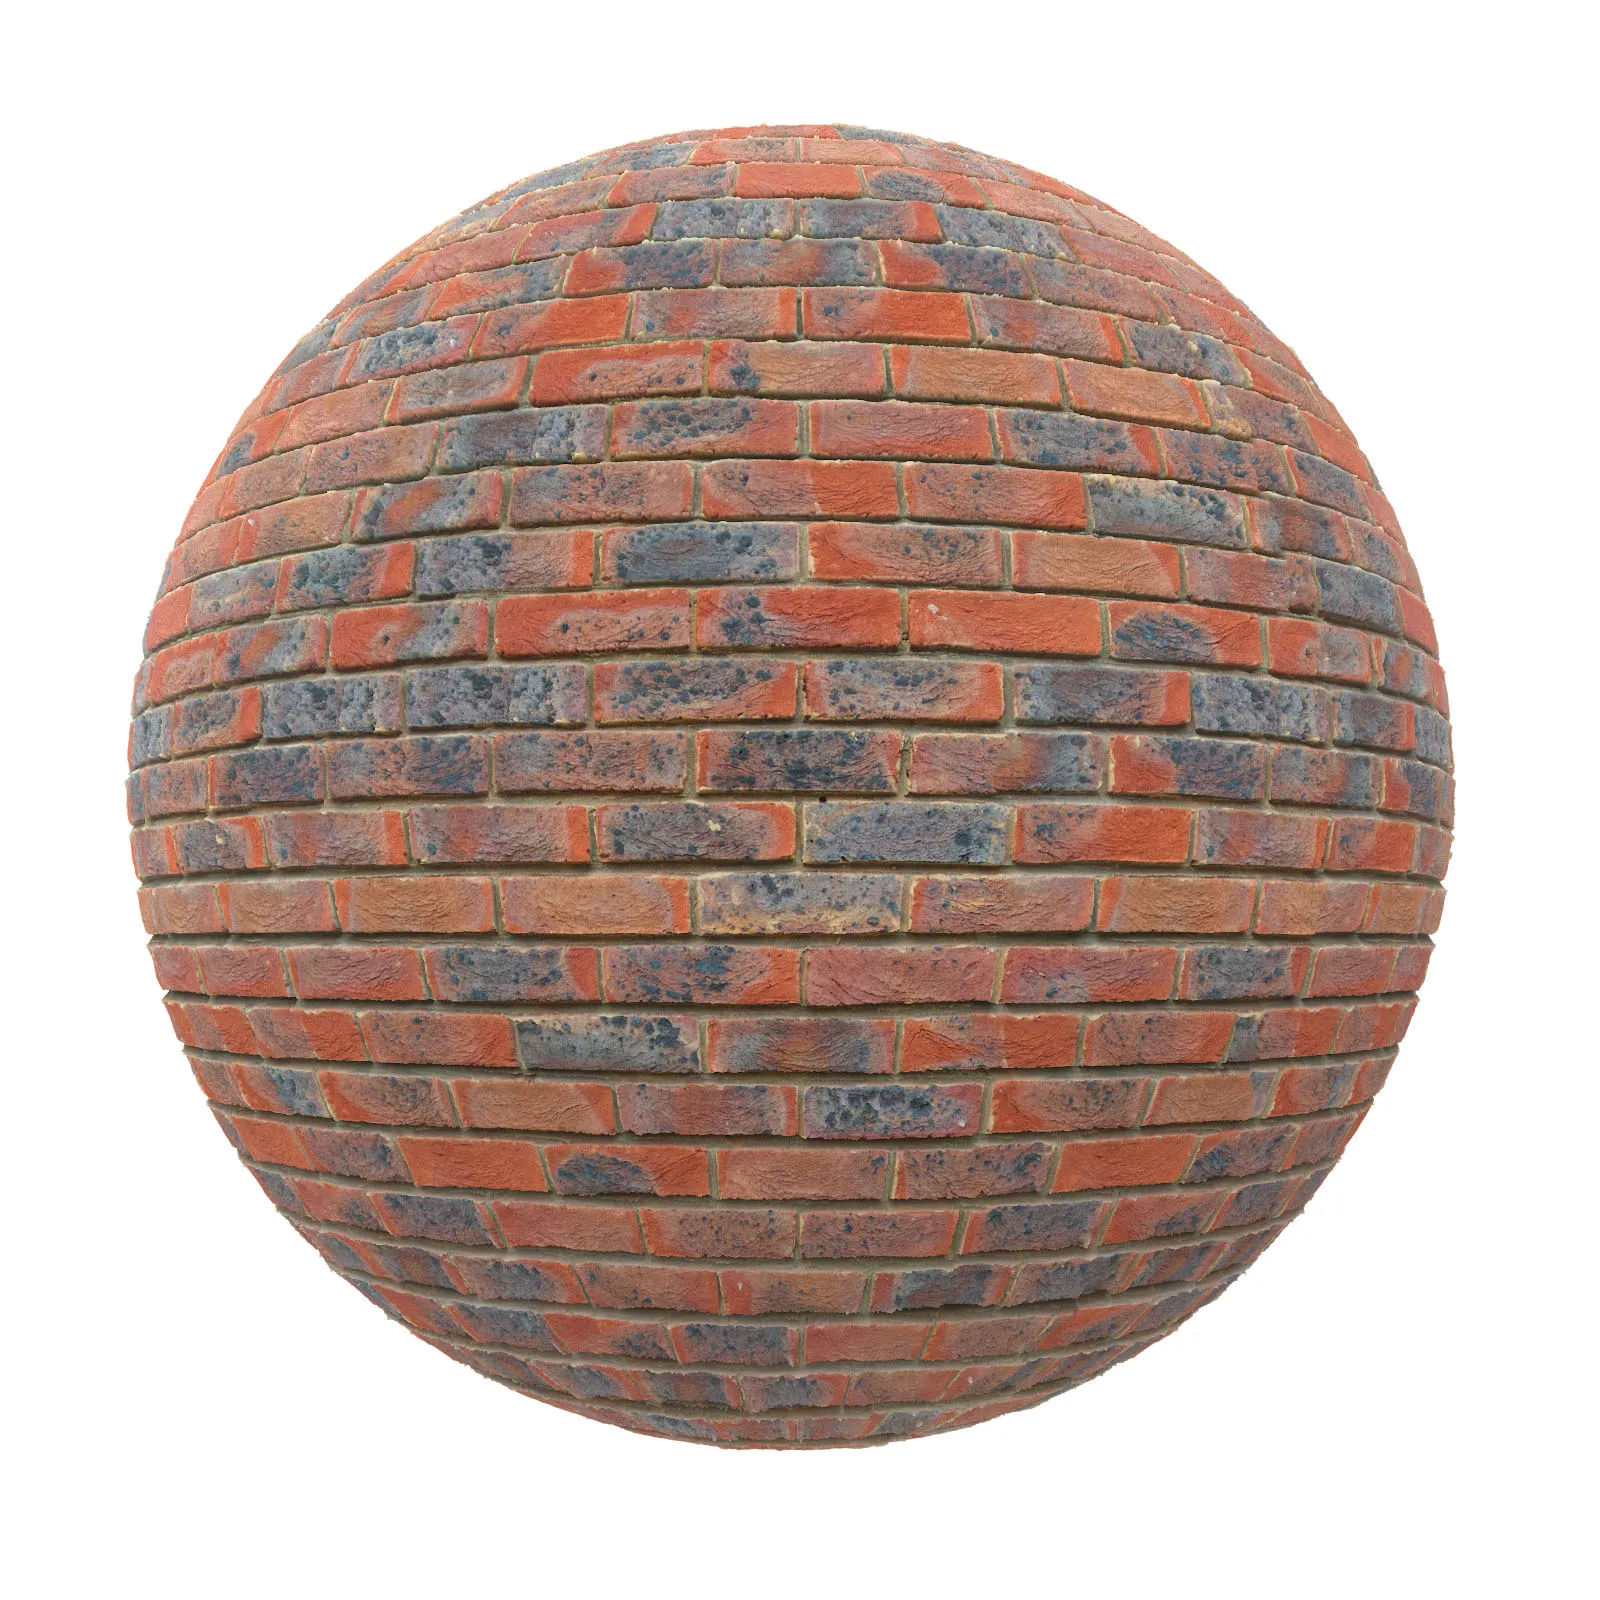 PBR CGAXIS TEXTURES – BRICK – Red And Black Brick Wall 1